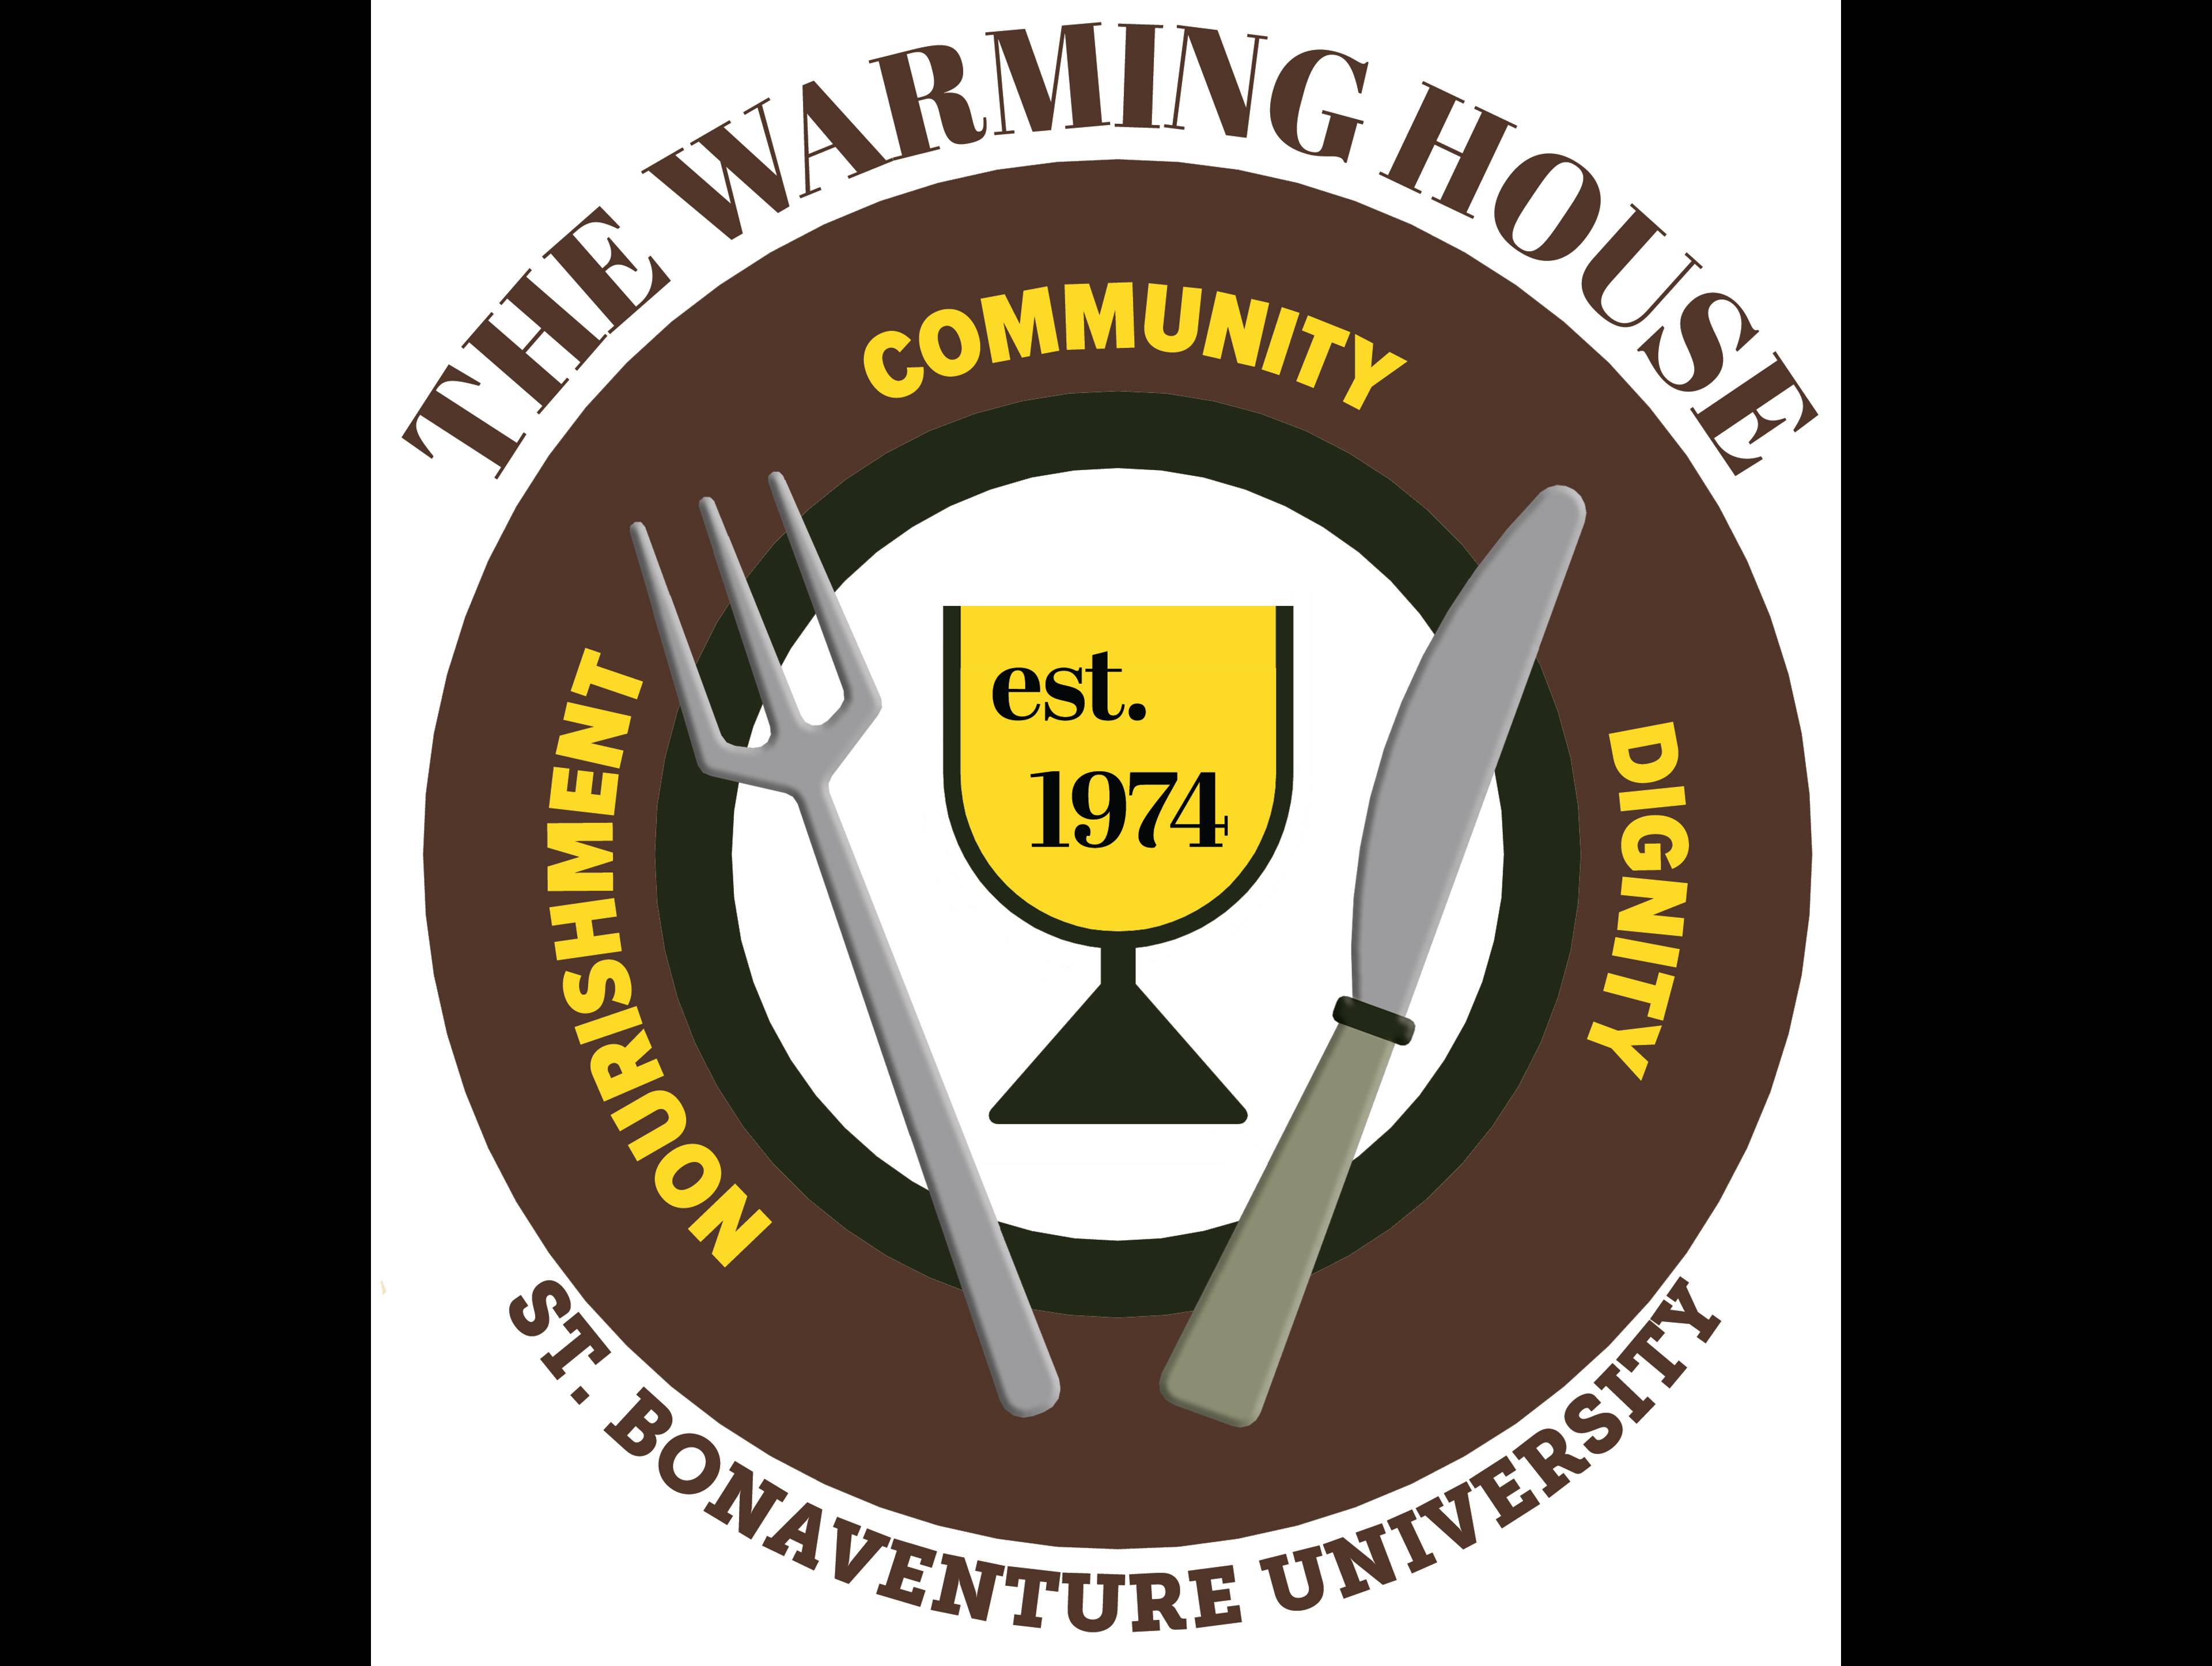 The Warming House